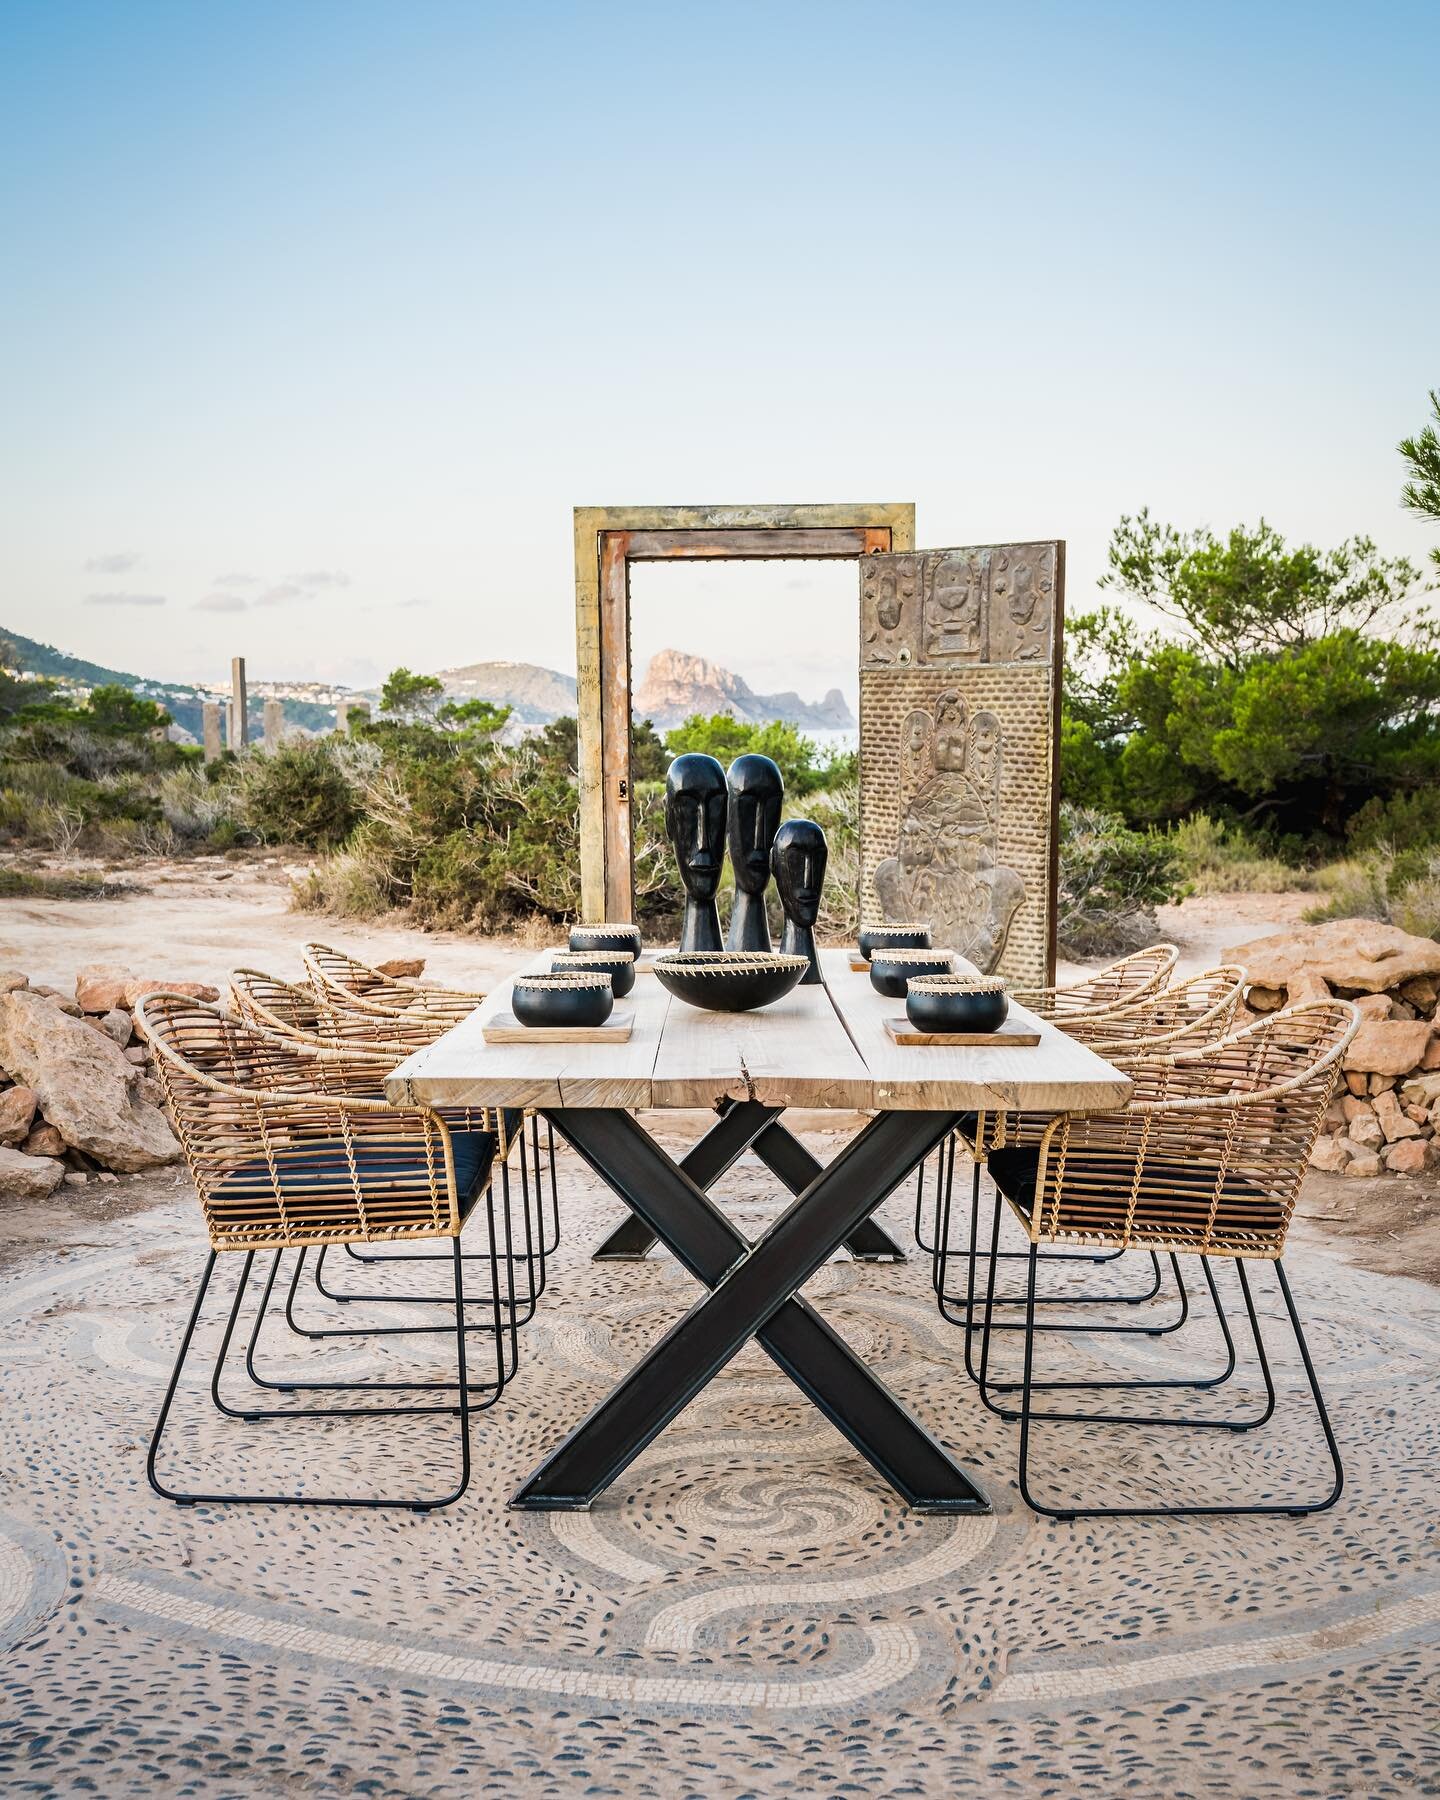 Outdoor furniture made from natural materials blends in with its surroundings, creating harmonious and comfortable spaces. Enjoy the beauty and sustainability of natural materials with the new @abouthouseibiza collection, inspired by Mediterranean na